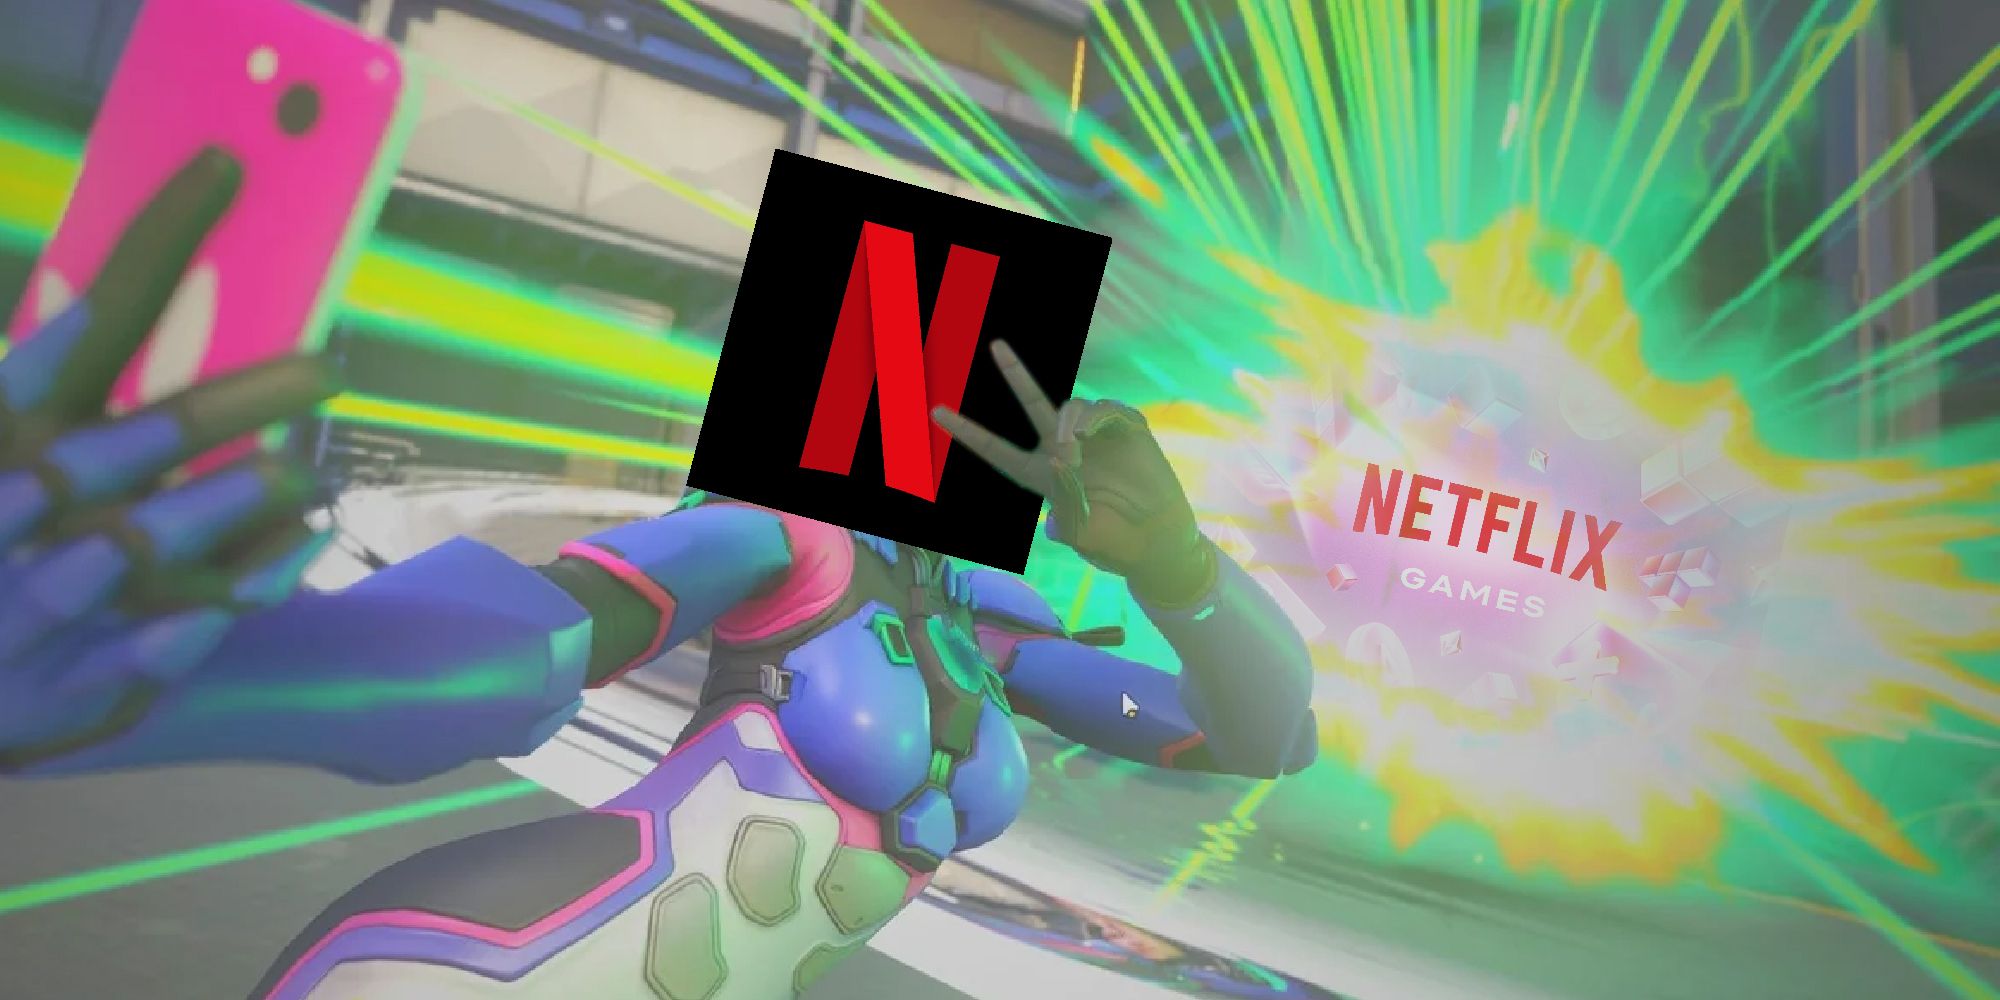 D.Va from Overwatch 2 with the Netflix logo as a head taking a selfie with Netflix Games